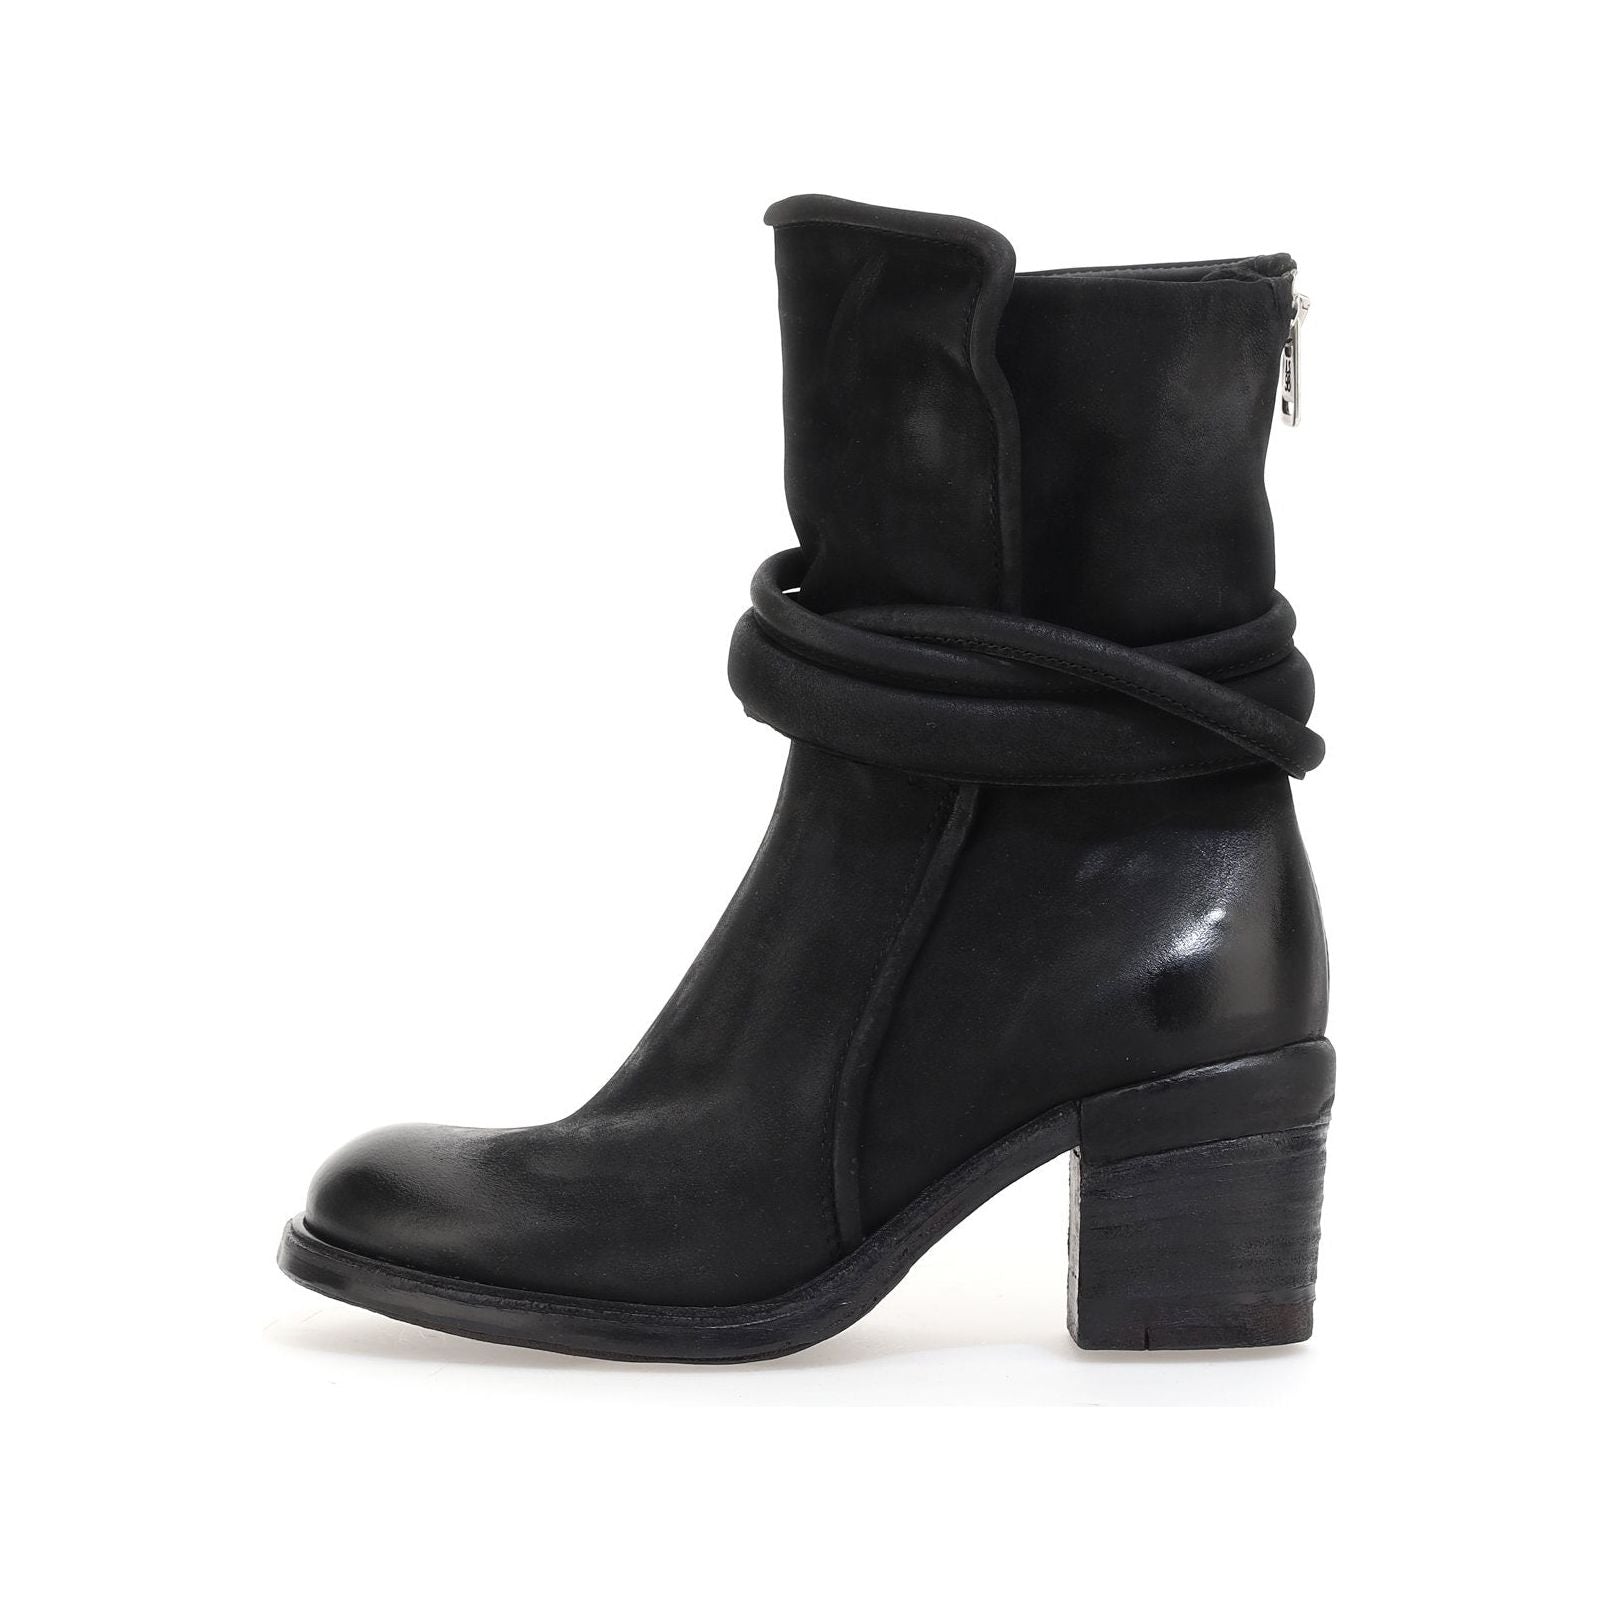 AS98 - Mid Calf Boot in Nero-SQ9721993